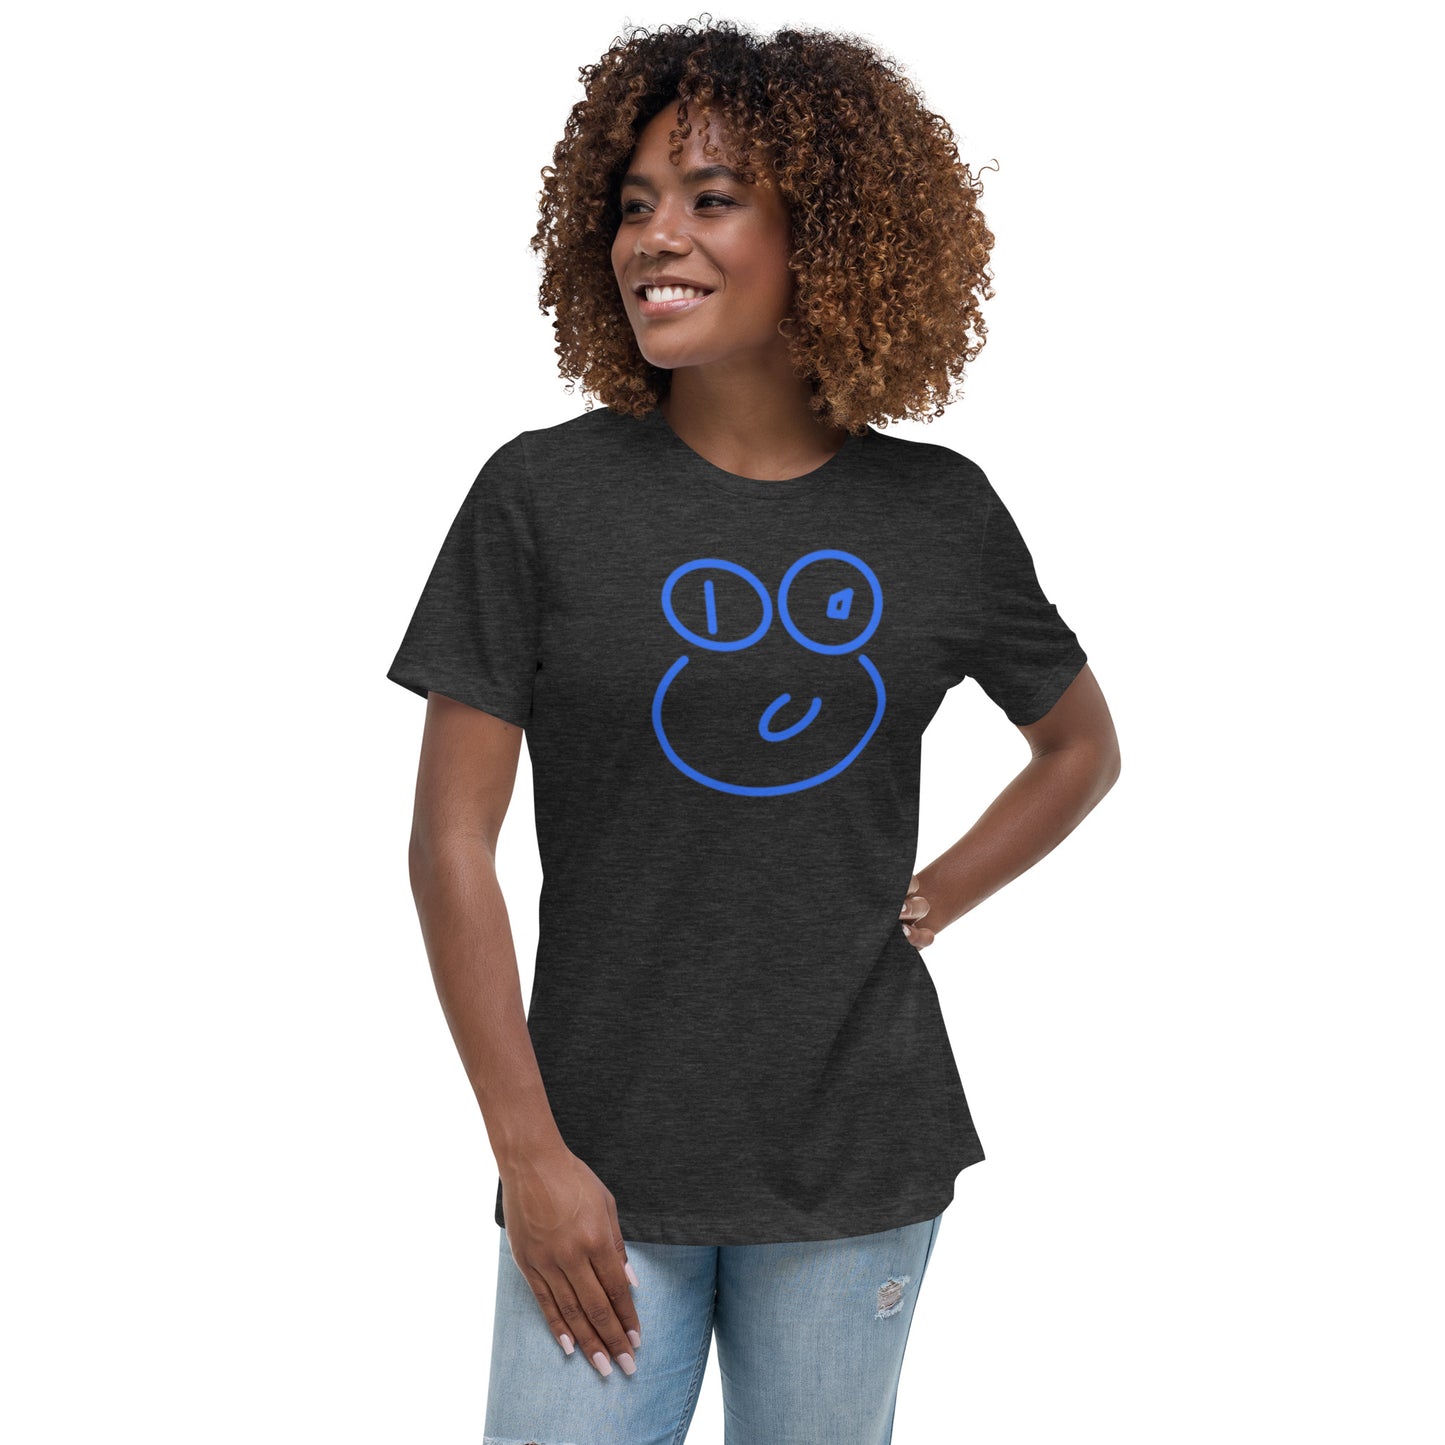 CP's Silly Face Women's Relaxed T-Shirt